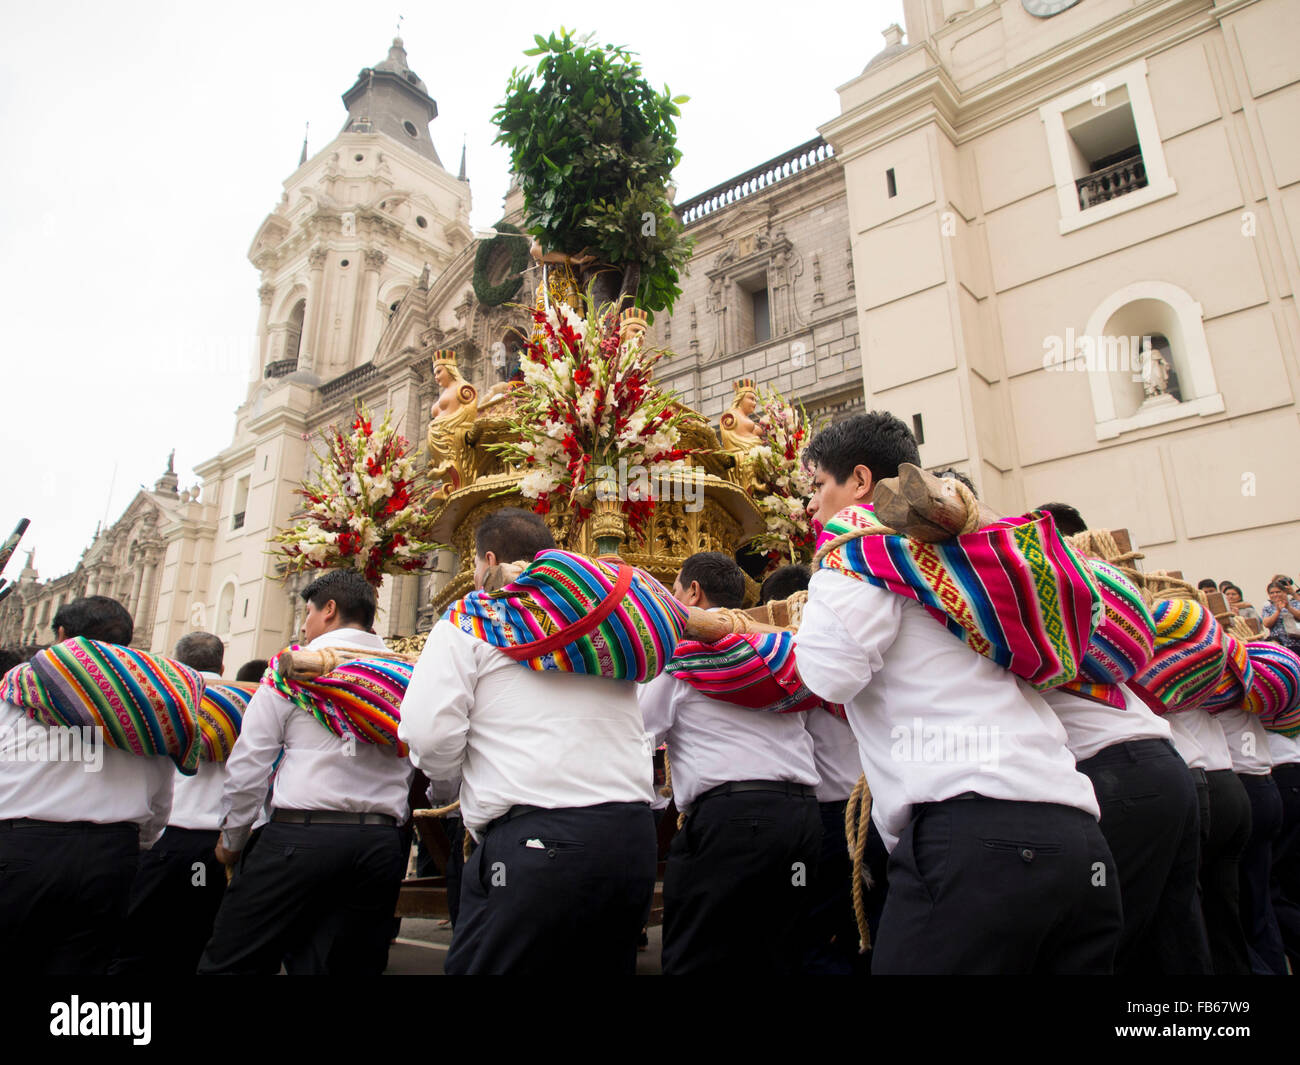 Lima, Peru. 10th January, 2016. Procession of religious images of Cuzco, in the main square of Lima, Peru Credit:  Carlos García Granthon/Alamy Live News Stock Photo